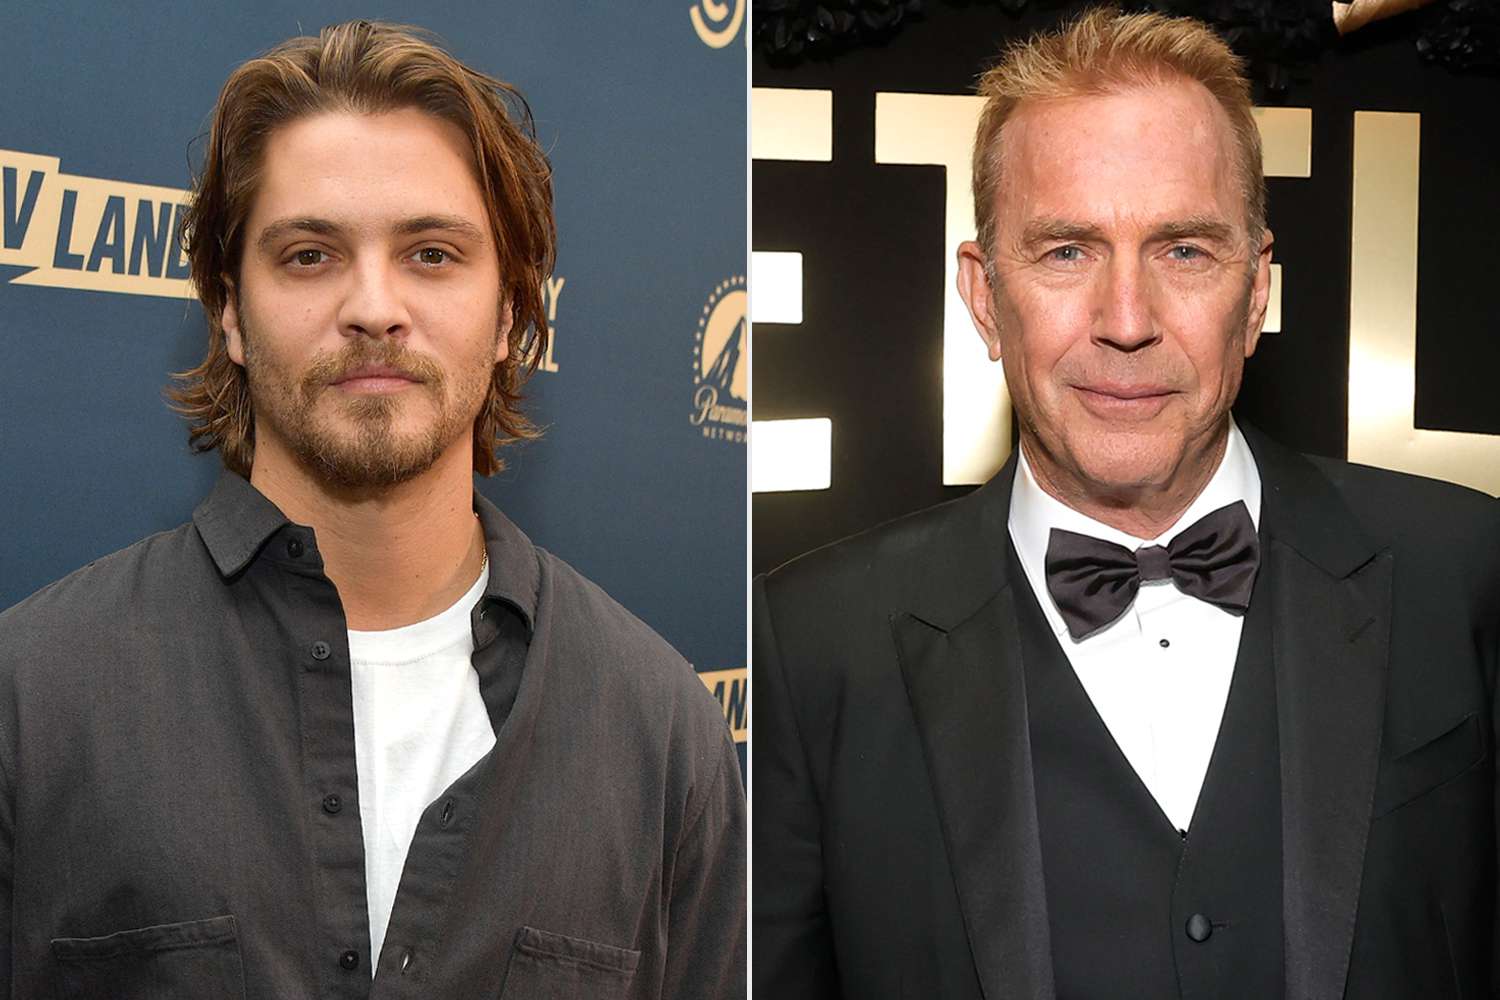 Luke Grimes Understands Kevin Costner's 'Unfortunate' “Yellowstone” Exit: 'You Gotta Do What You Gotta Do'